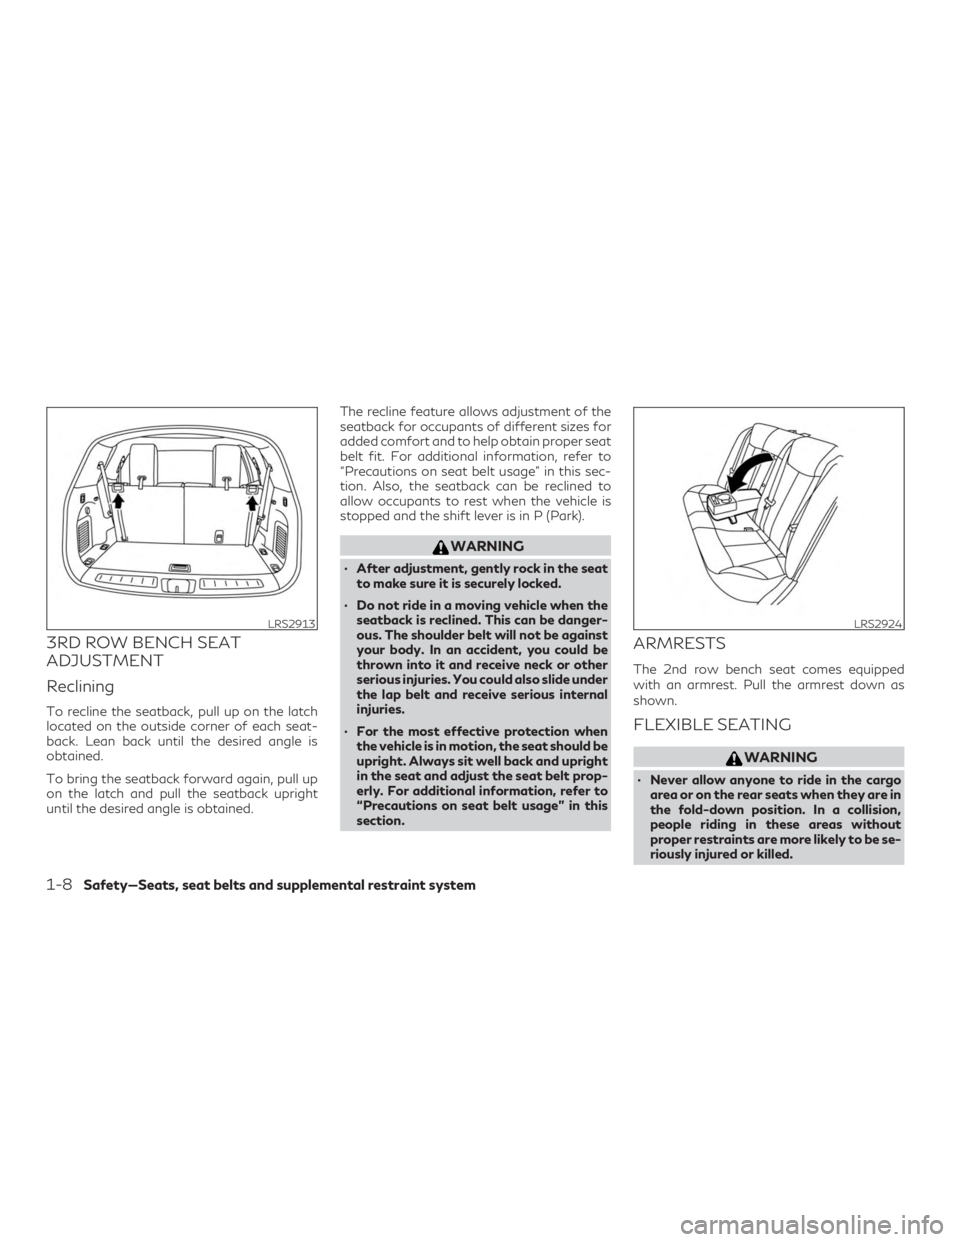 INFINITI QX60 2018  Owners Manual 3RD ROW BENCH SEAT
ADJUSTMENT
Reclining
To recline the seatback, pull up on the latch
located on the outside corner of each seat-
back. Lean back until the desired angle is
obtained.
To bring the seat